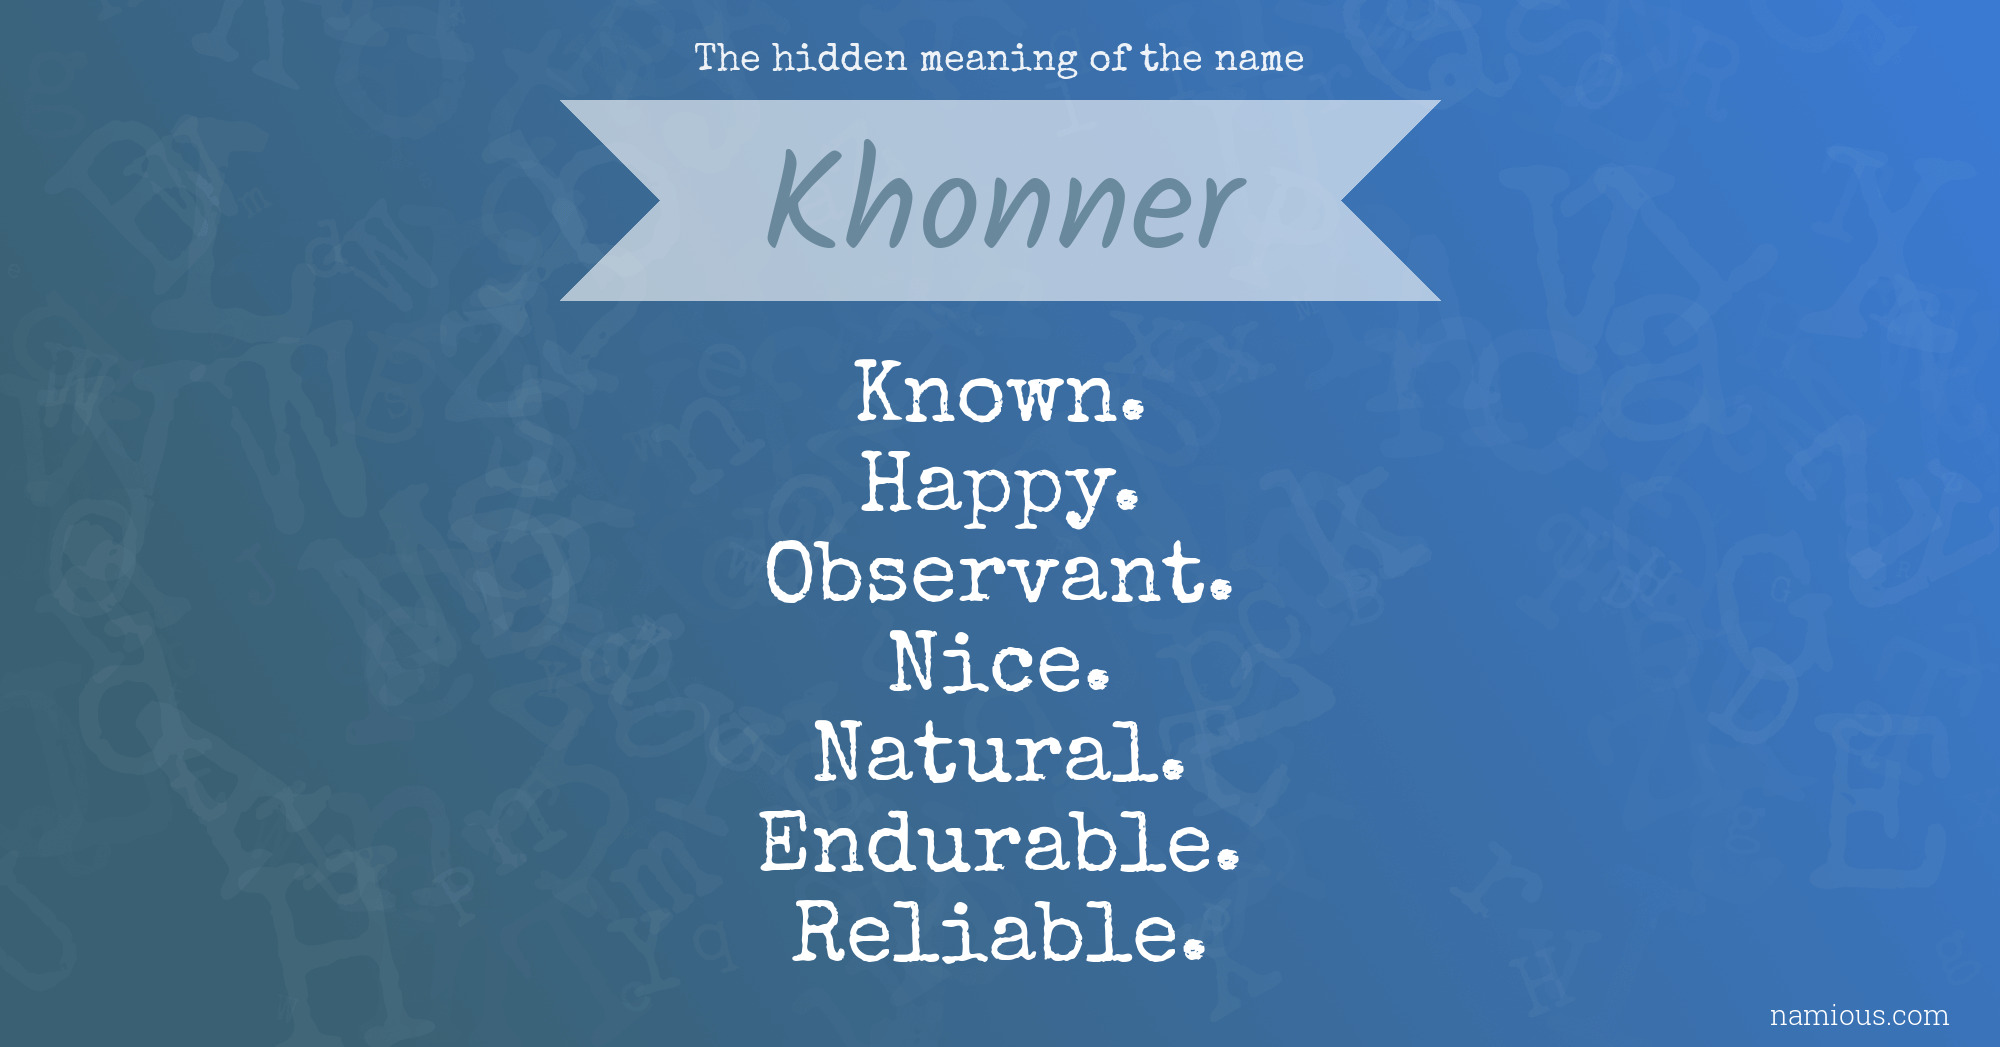 The hidden meaning of the name Khonner